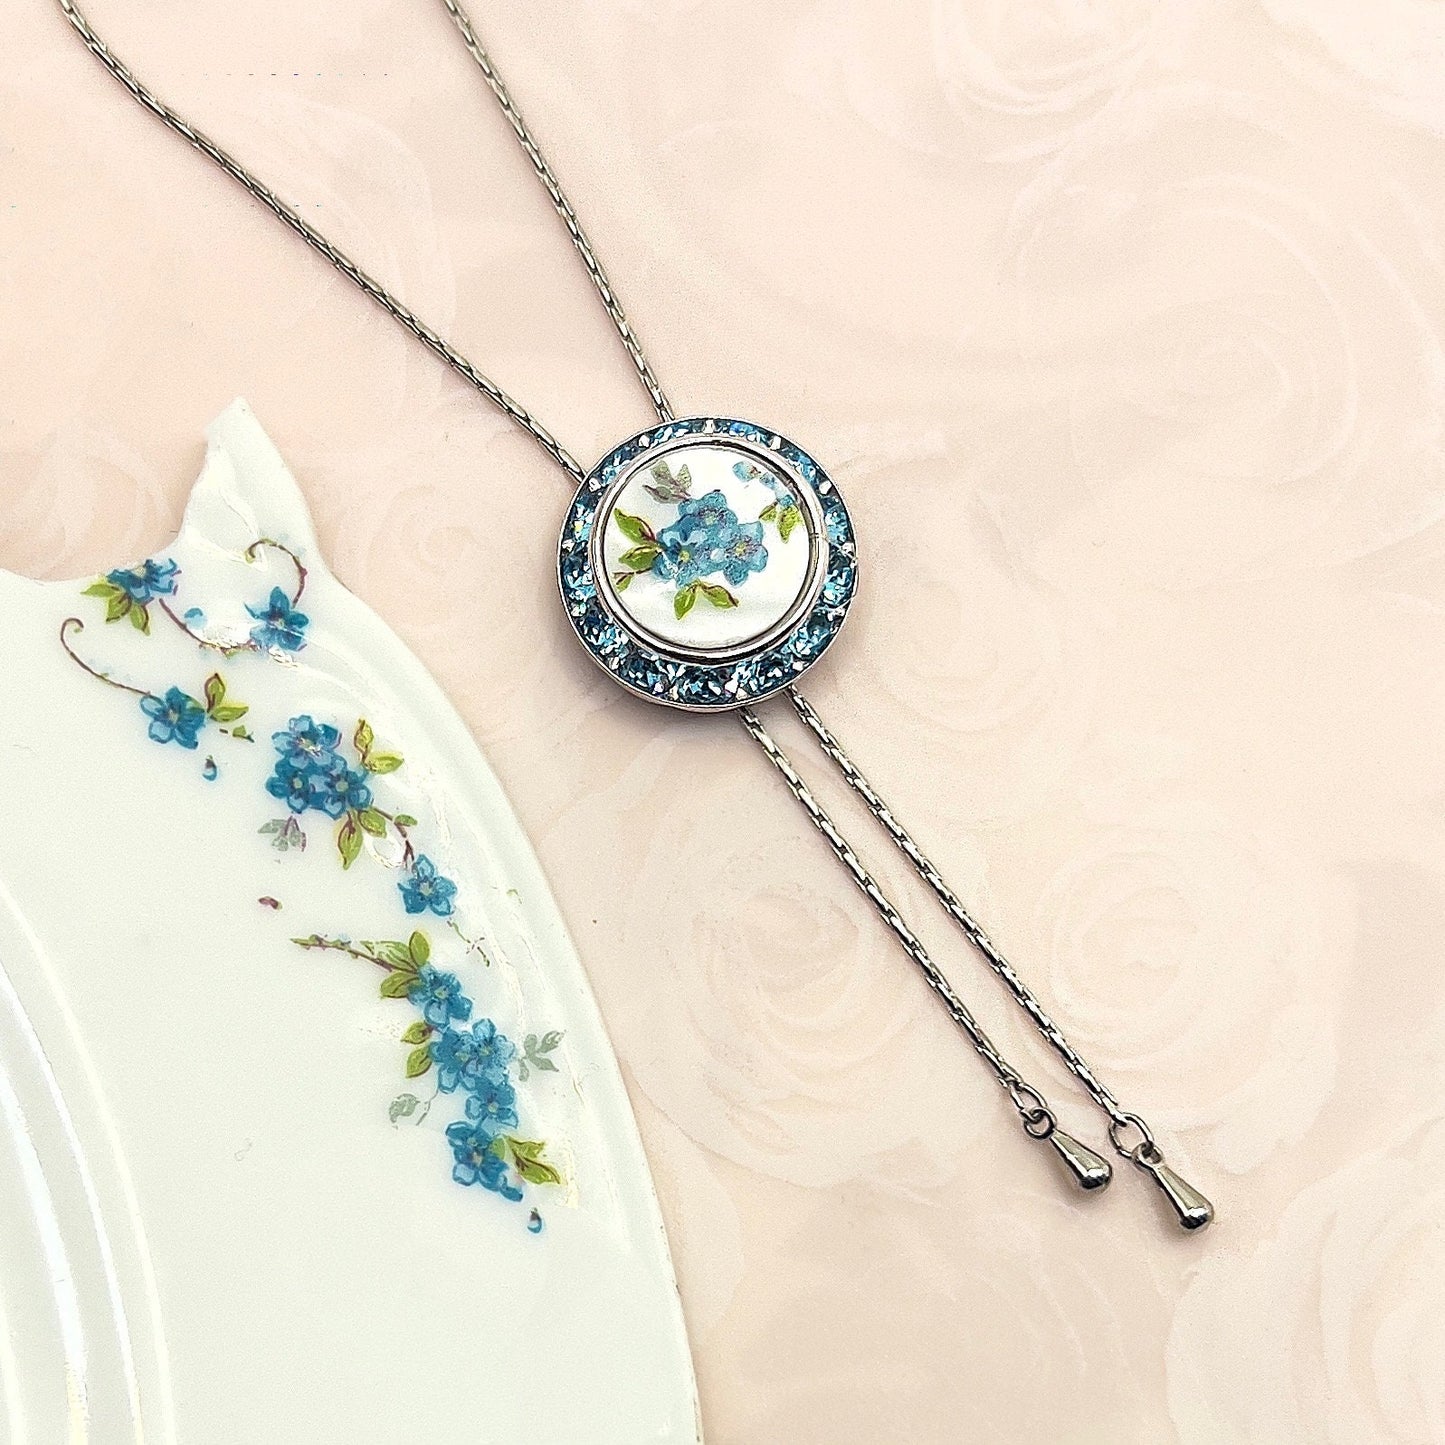 Adjustable Forget Me Not Necklace, Broken China Jewelry Lariat, Long Aqua Blue Crystal Necklace